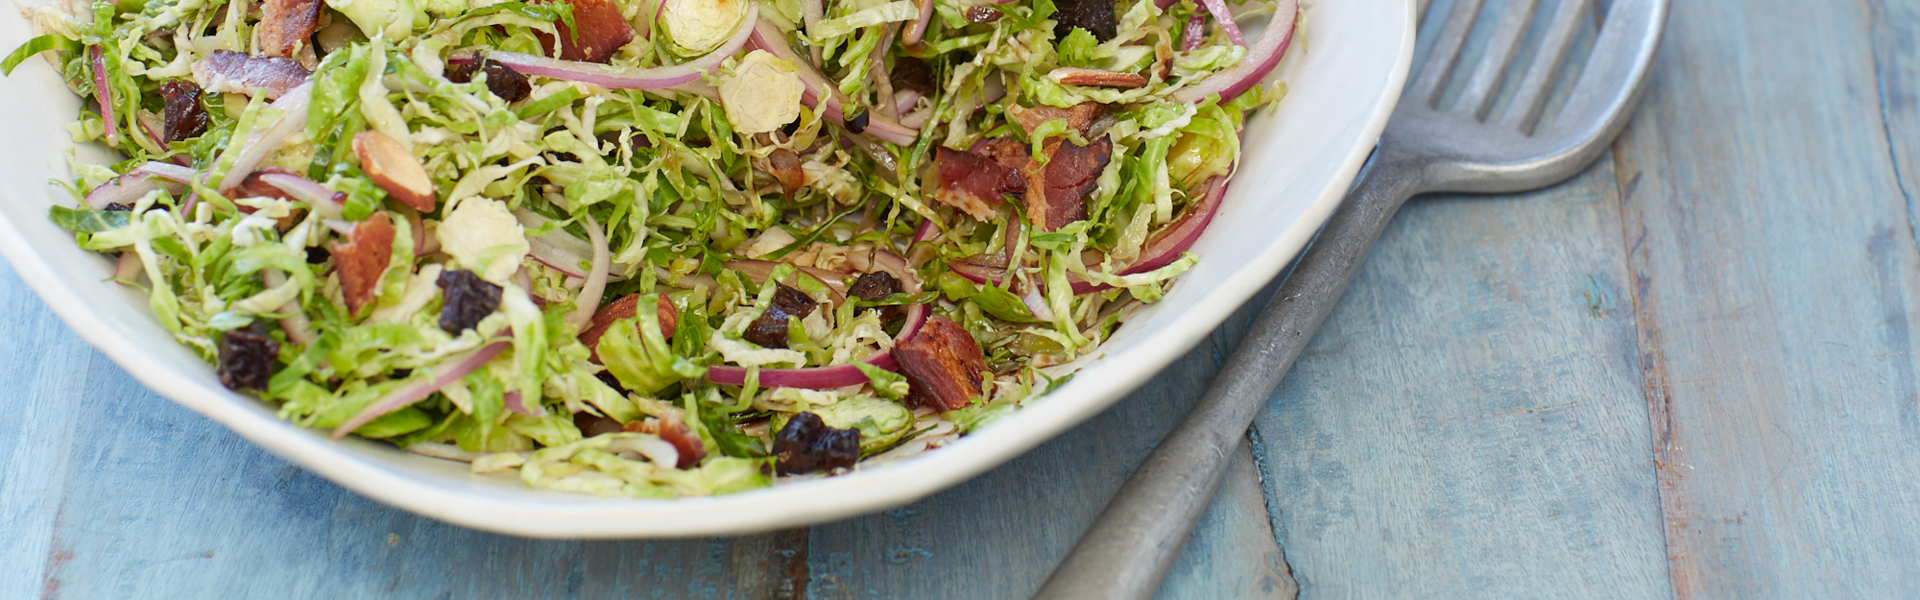 prune and brussels sprouts salad